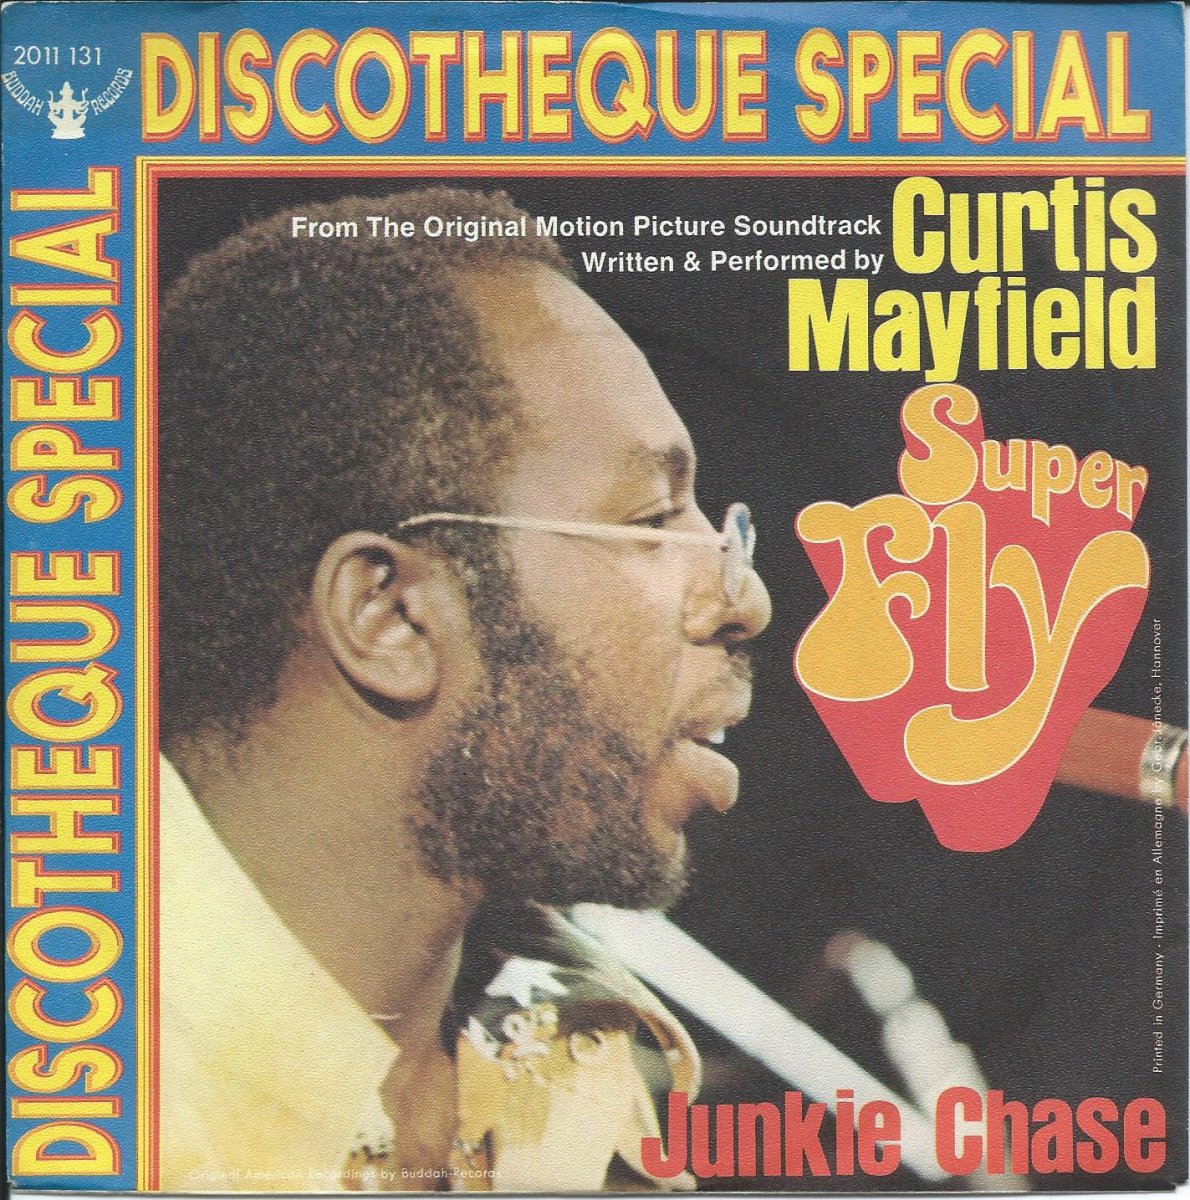 CURTIS MAYFIELD / SUPERFLY / JUNKIE CHASE (7